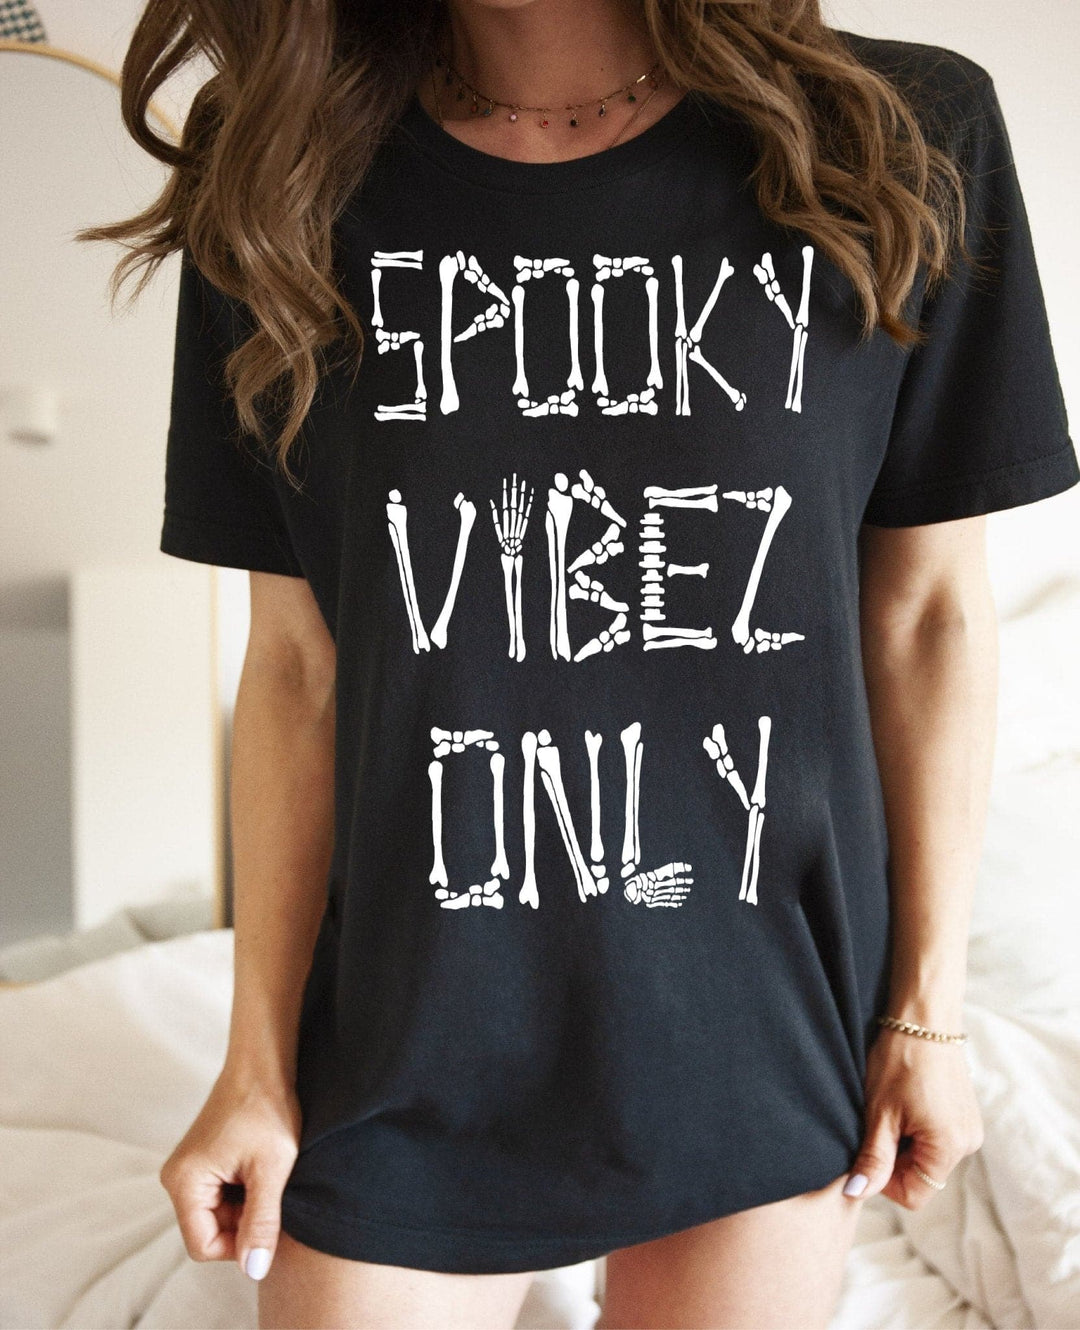 Spooky Vibes Only *Glow In The Dark* Tee